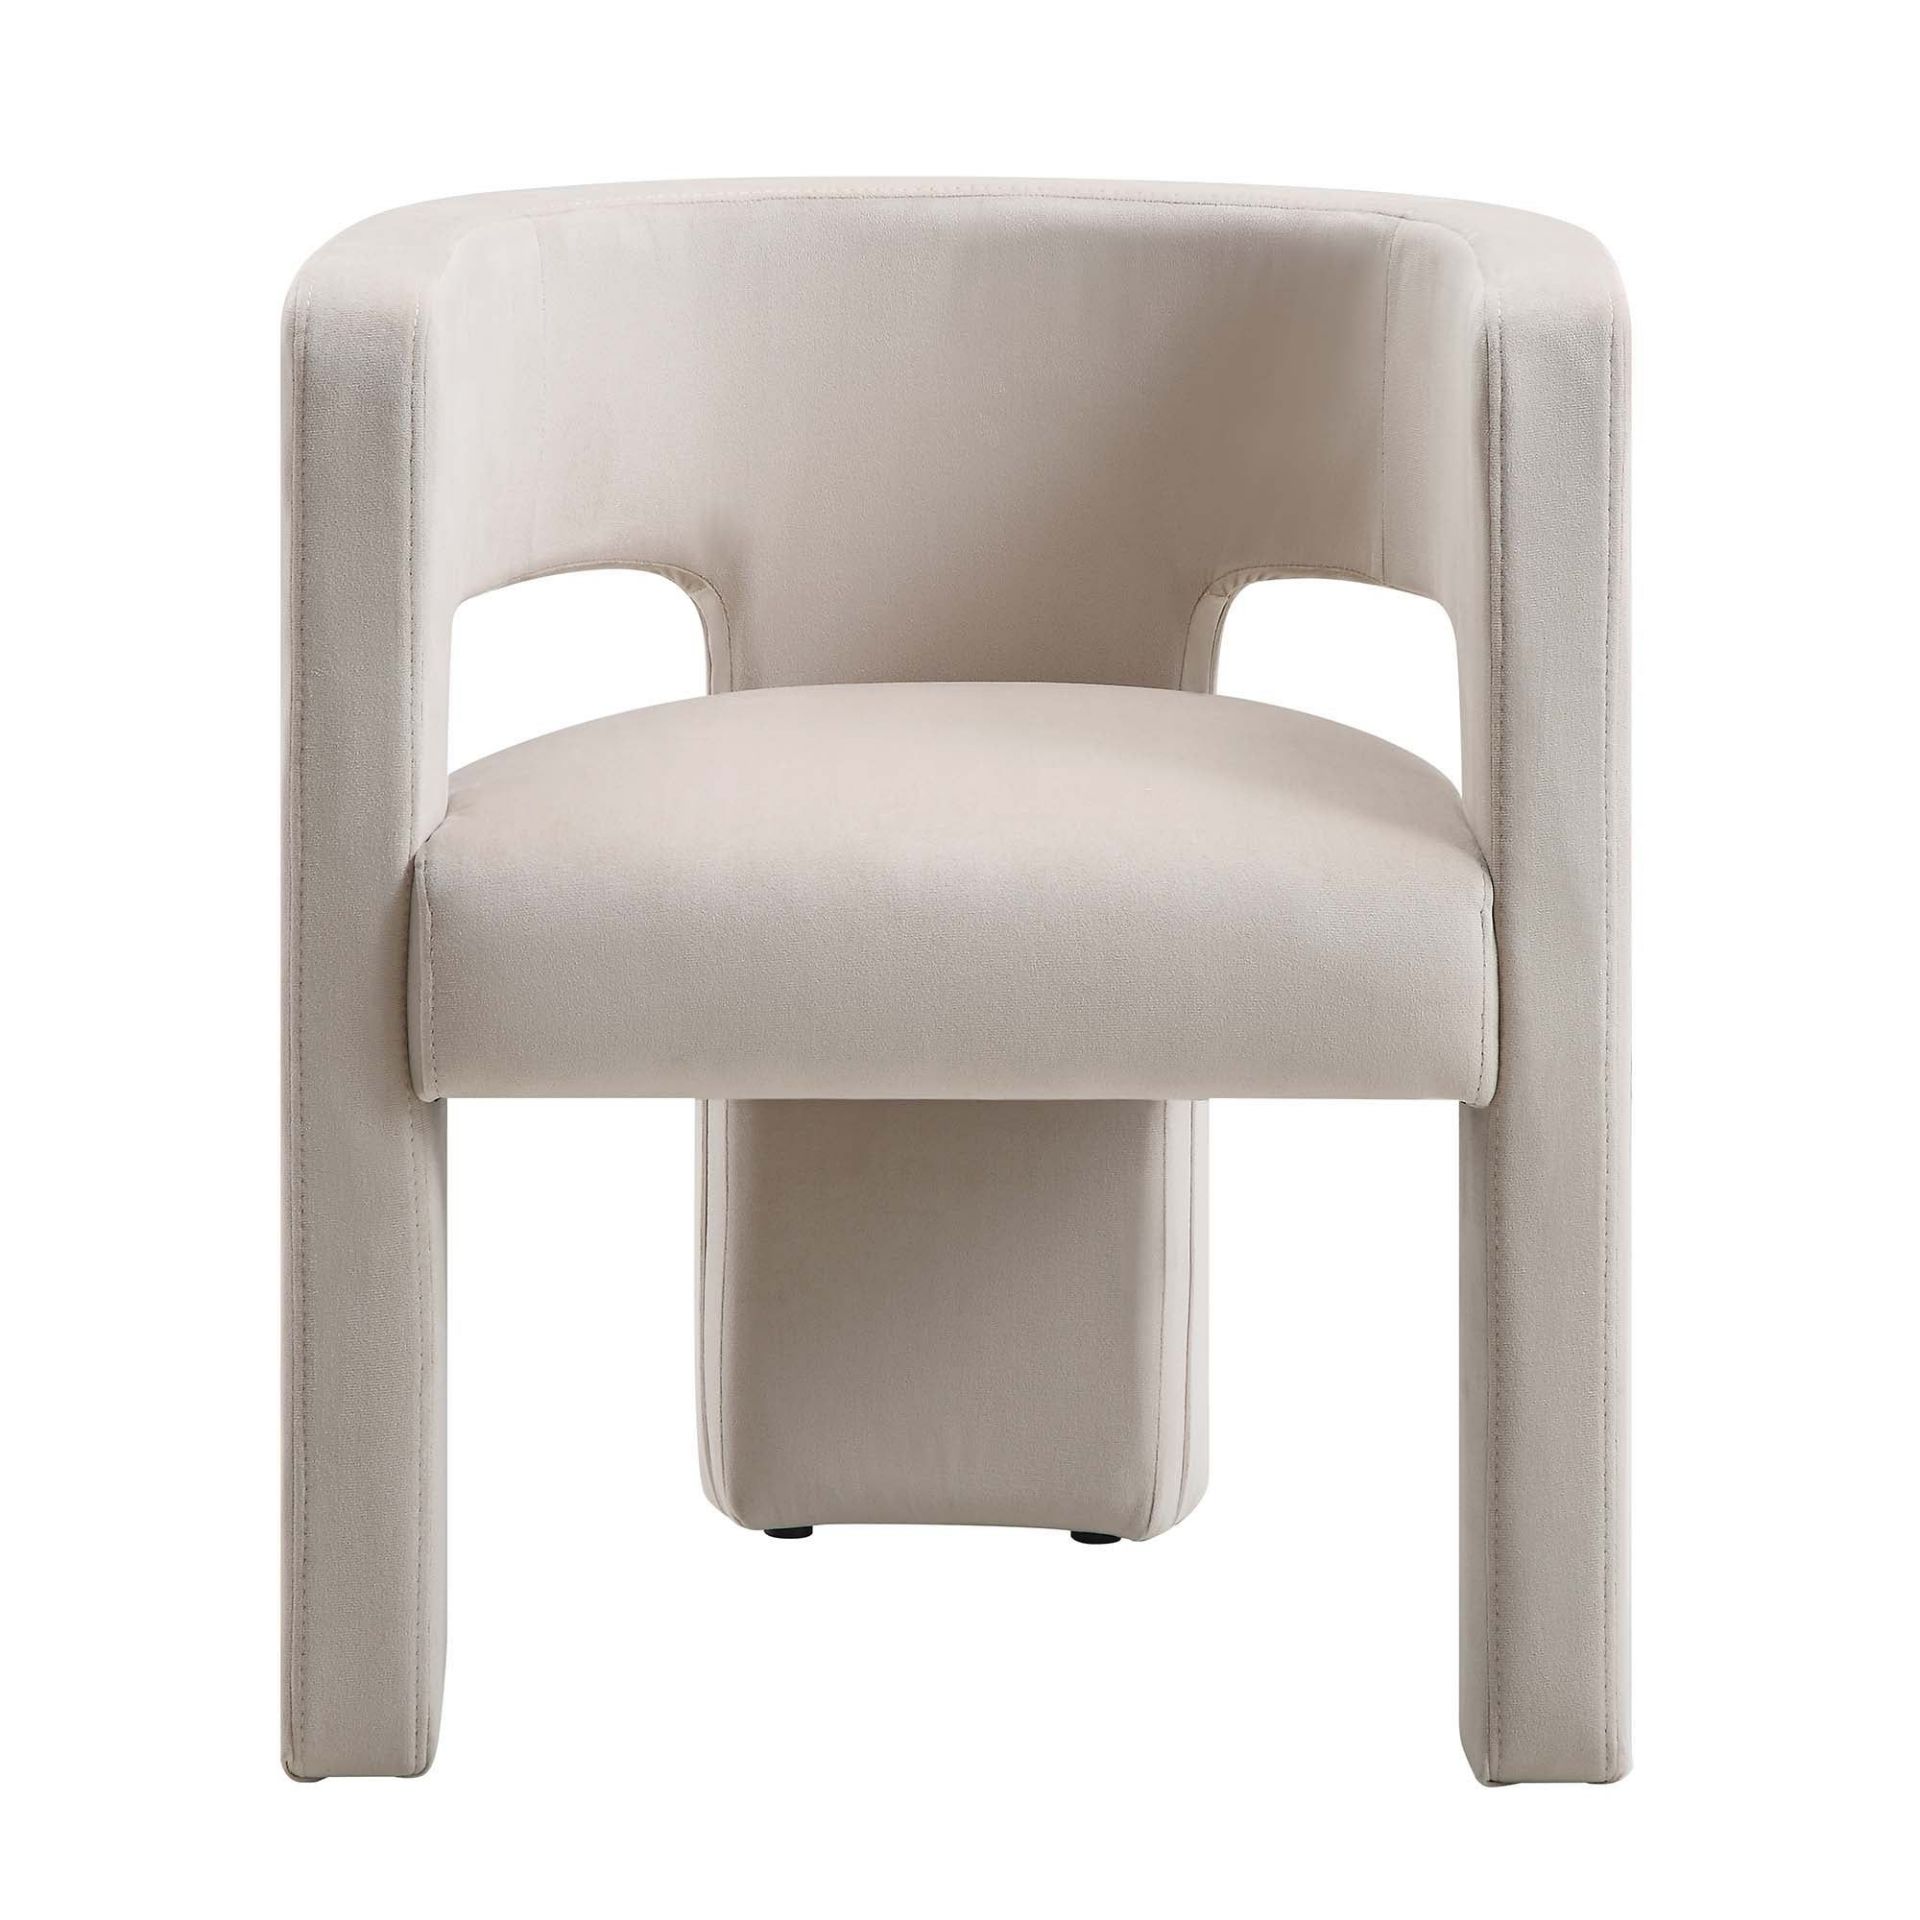 Greenwich Champagne Velvet Dining Chair. - R19.4. RRP £219.99. Our beautiful Greenwich chair